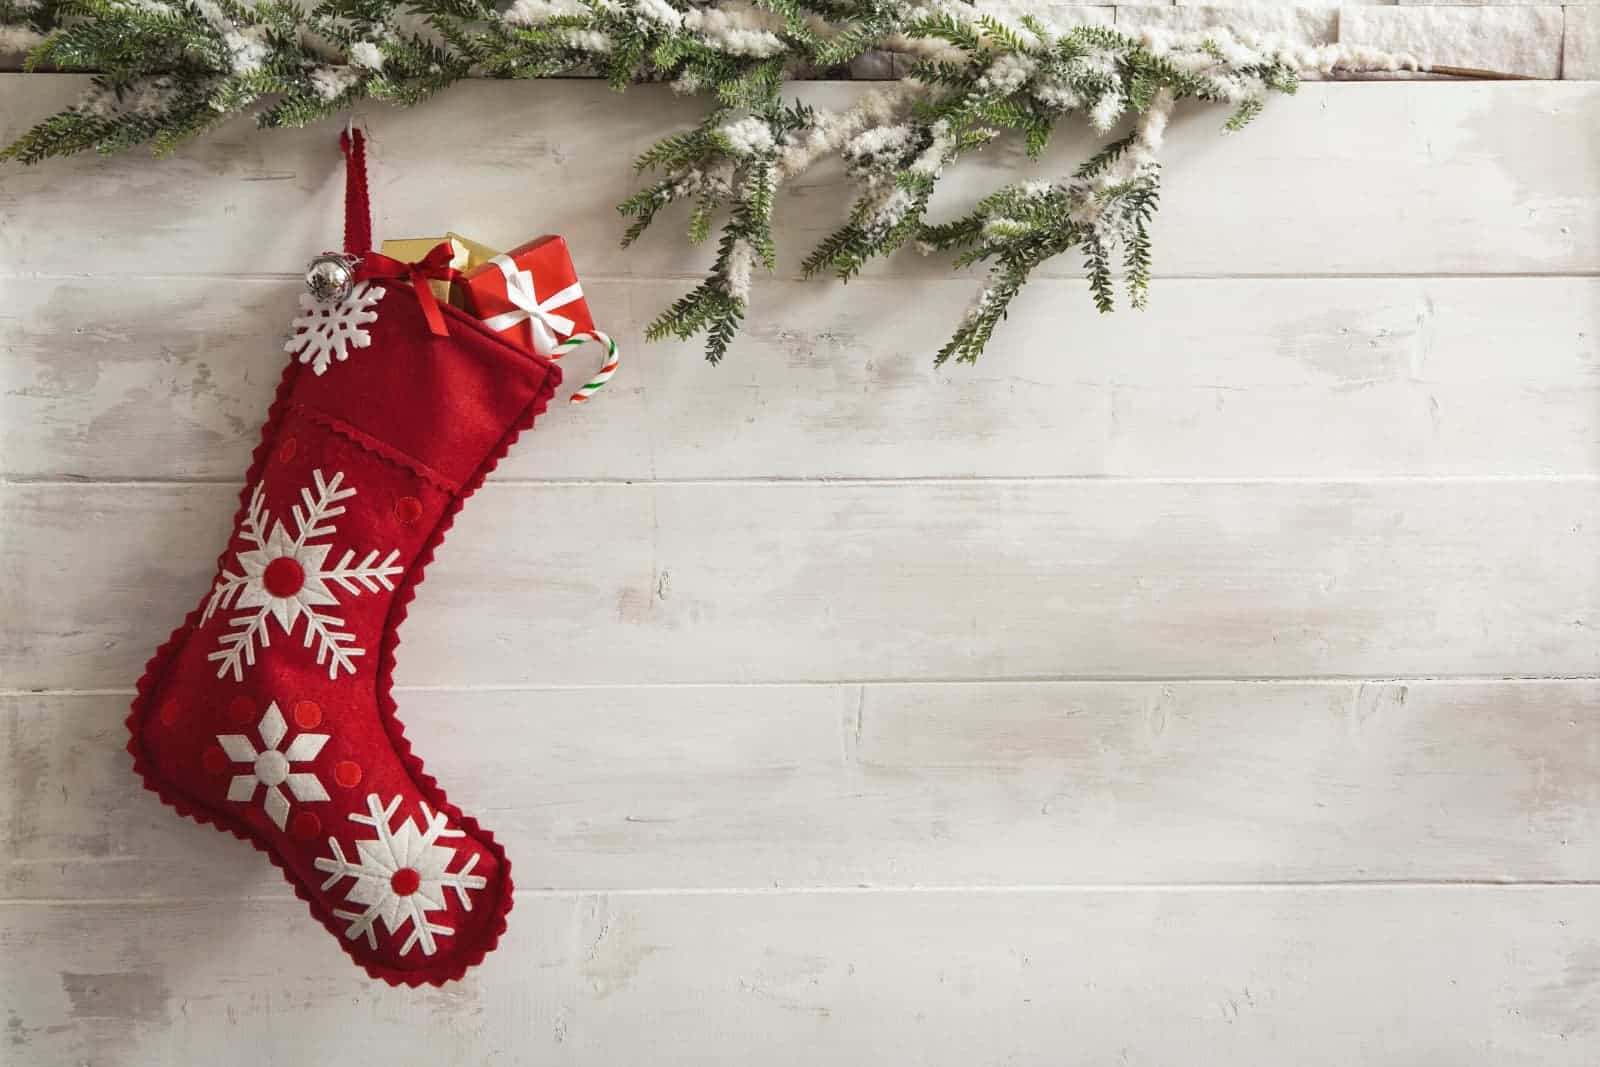 Red stocking with white snowflakes hanging against a white wood wall with pine branches covered in snow.